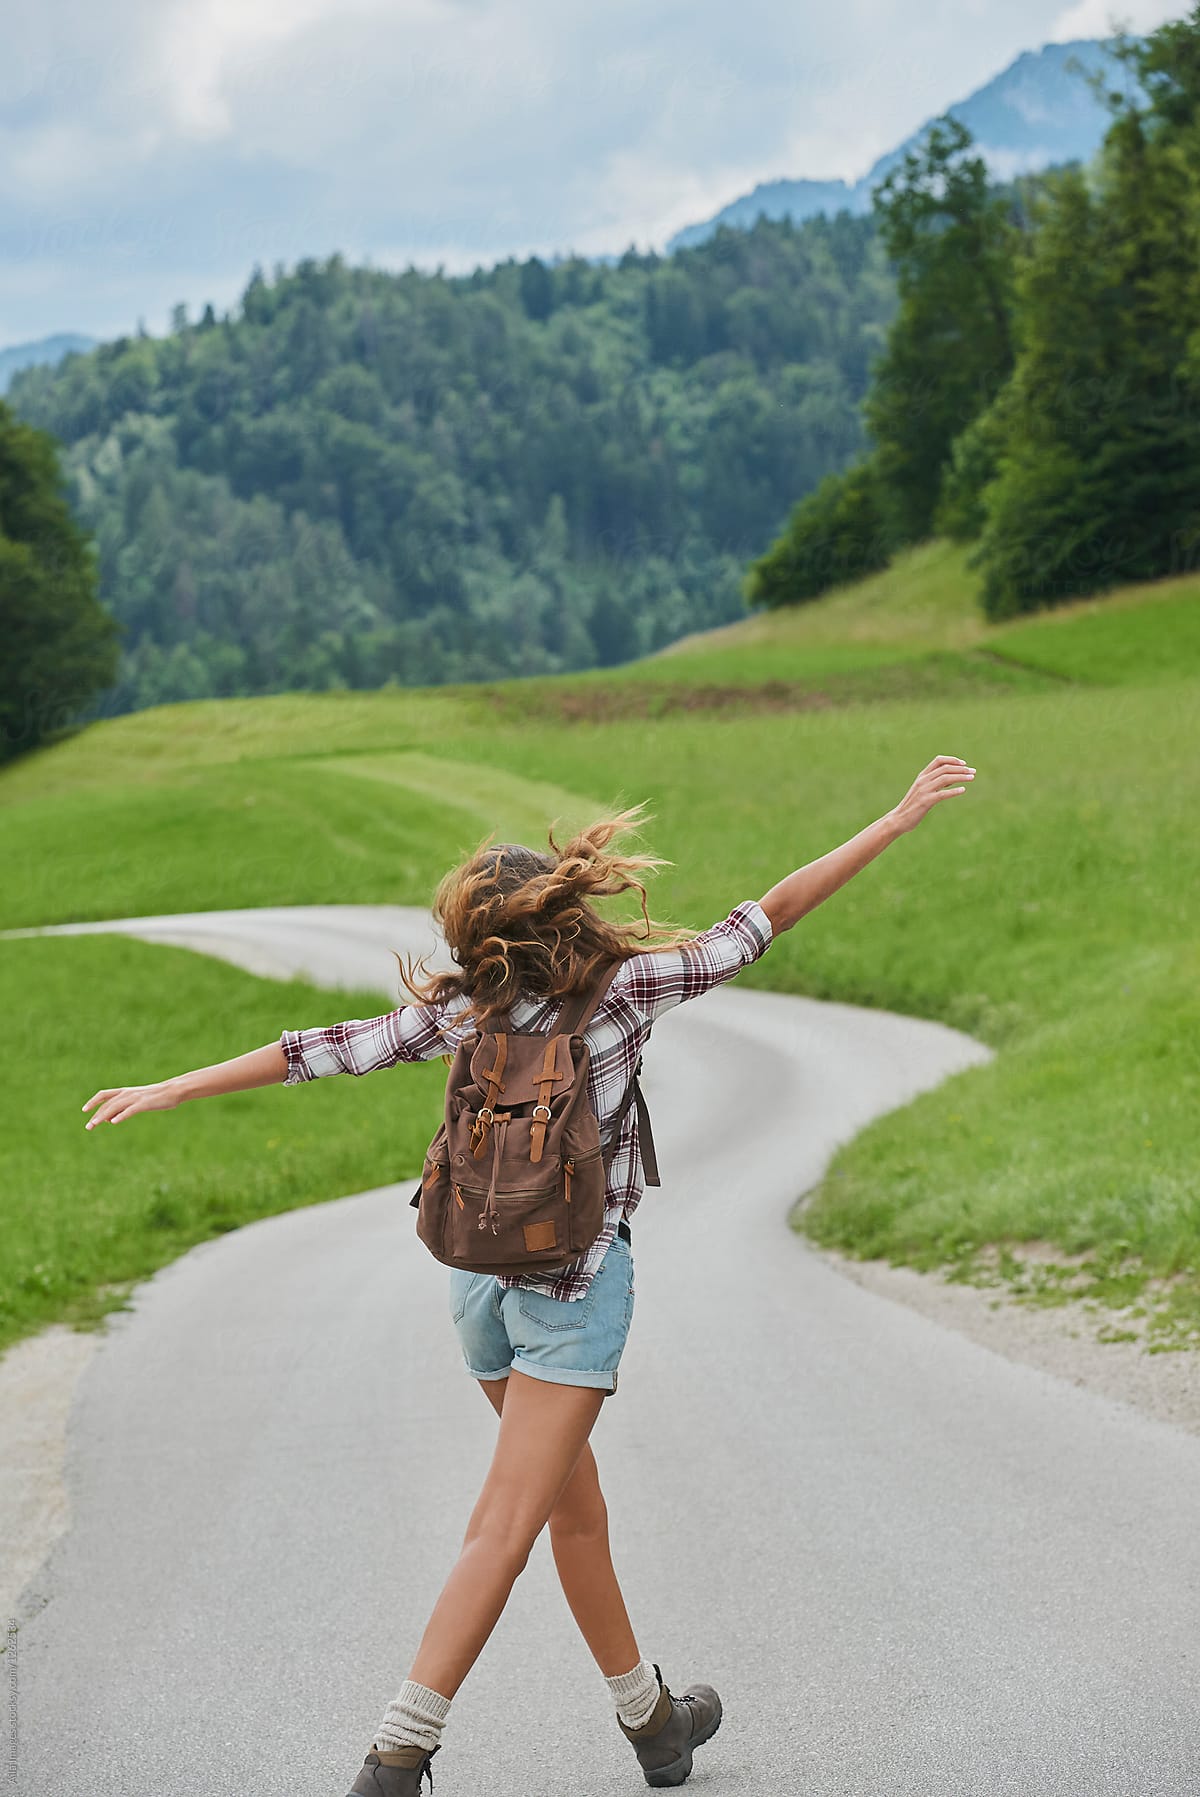 Happy girl dancing on scenic countryside road